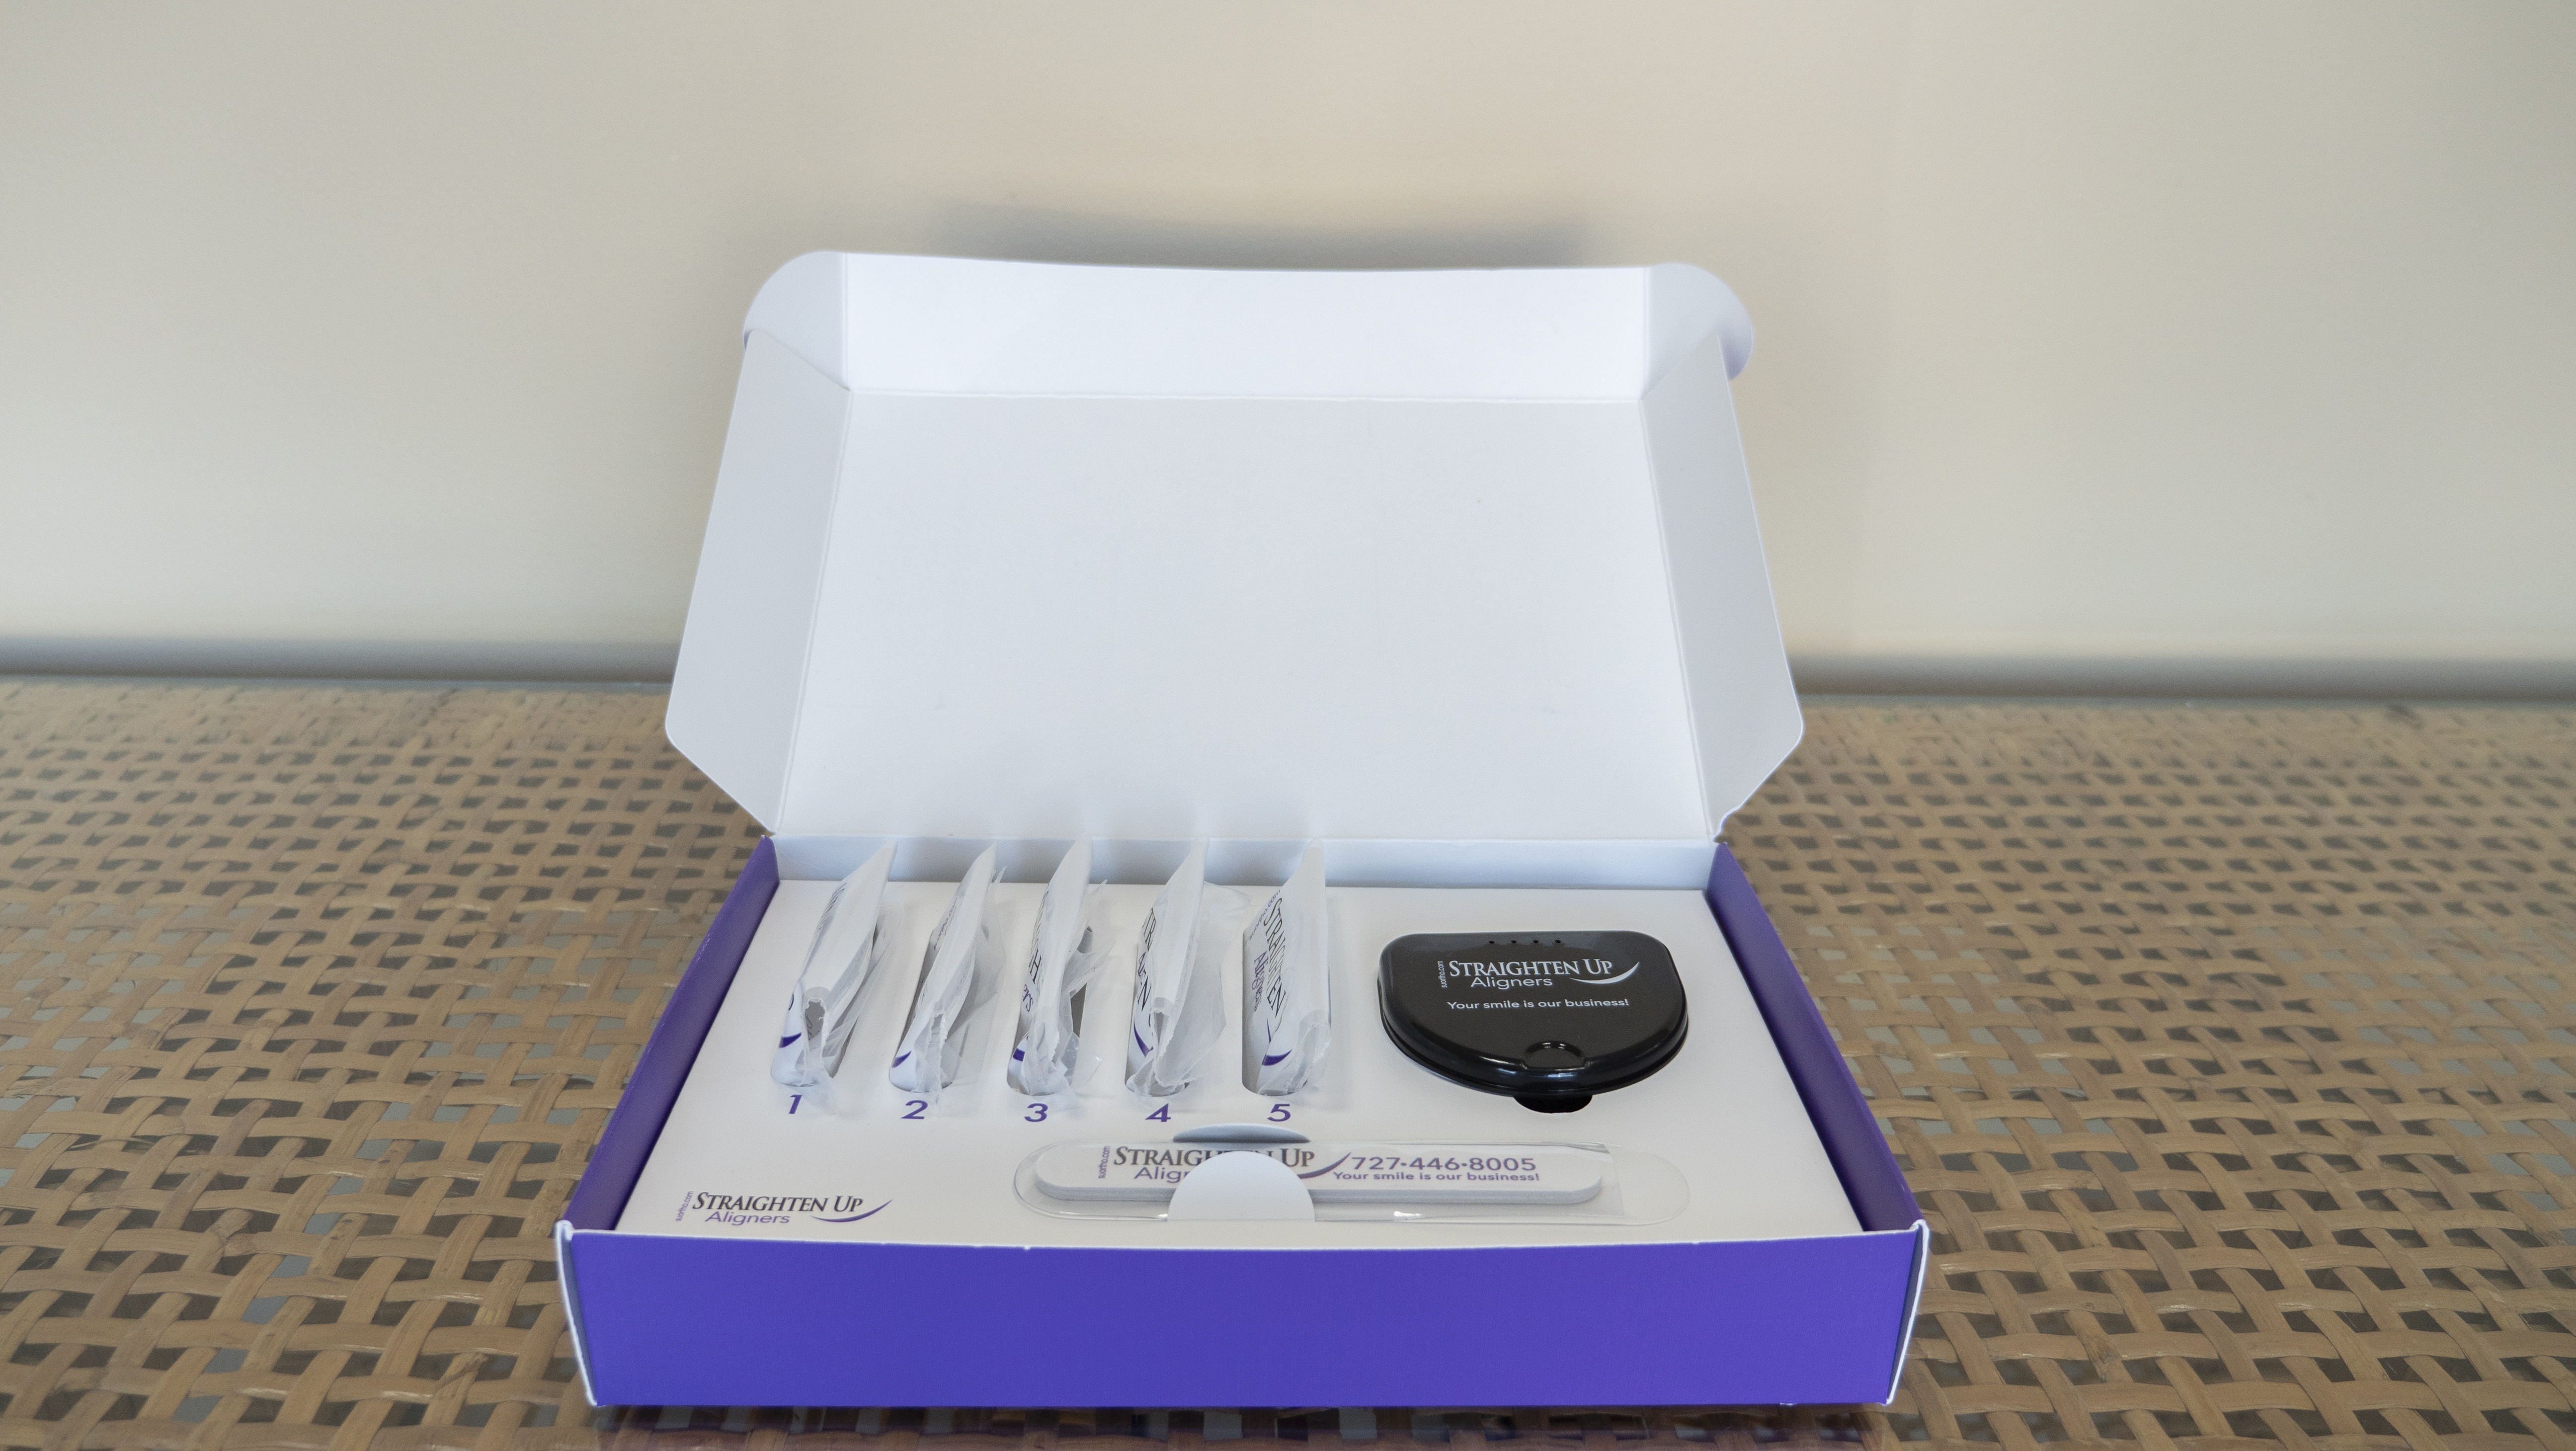 Orthodontic Aligner box provides great product packaging